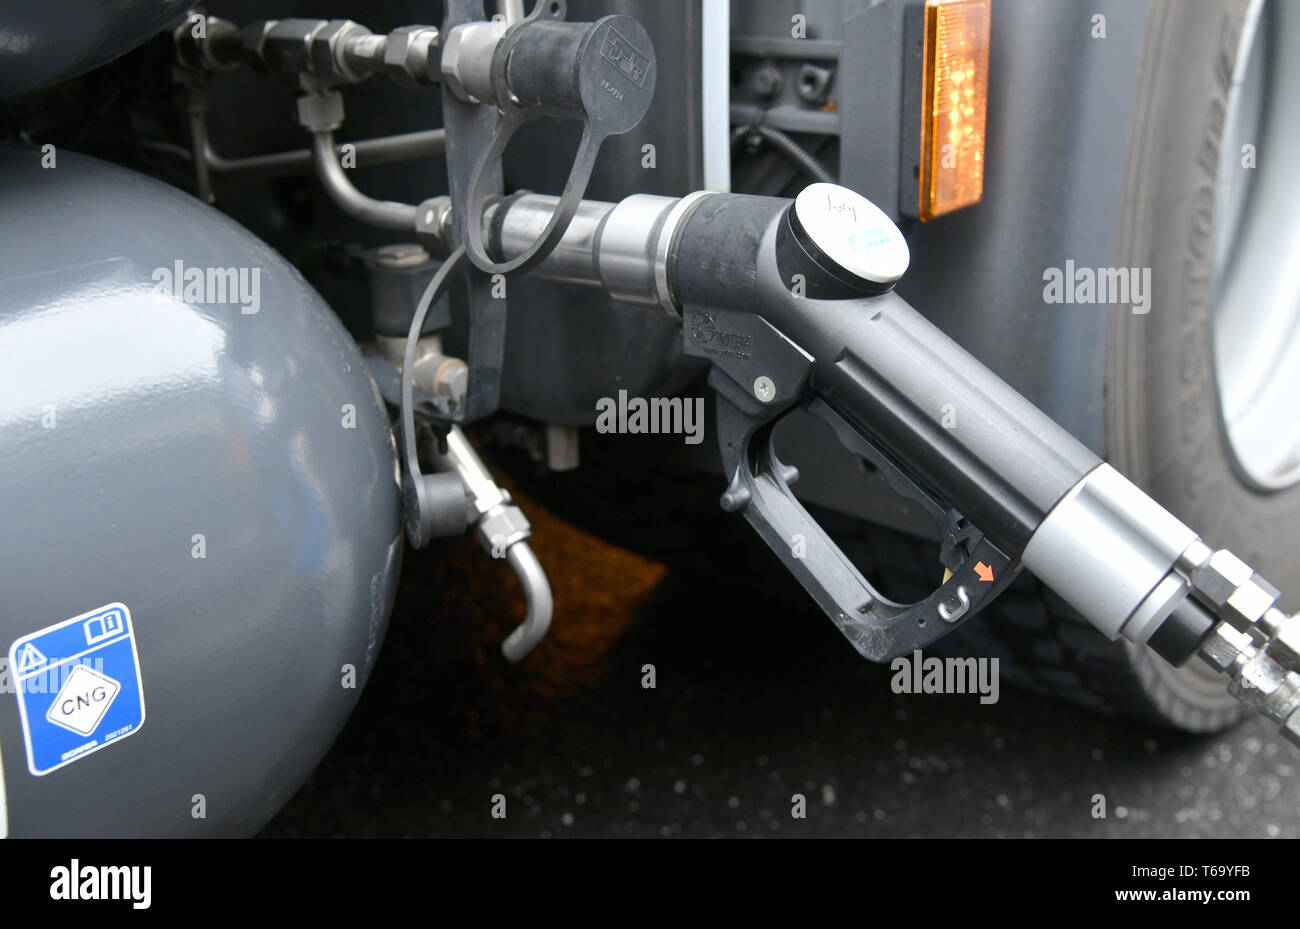 Berlin, Germany. 29th Apr, 2019. A fuel nozzle is located on the BEHALA port premises in Berlin in the tank of a semi-trailer tractor powered by biomethane. According to the Ministry of Transport, CO2 emissions will be reduced by up to 94 percent compared to transports with diesel-powered trucks. Credit: Bernd Settnik/dpa-Zentralbild/ZB/dpa/Alamy Live News Stock Photo